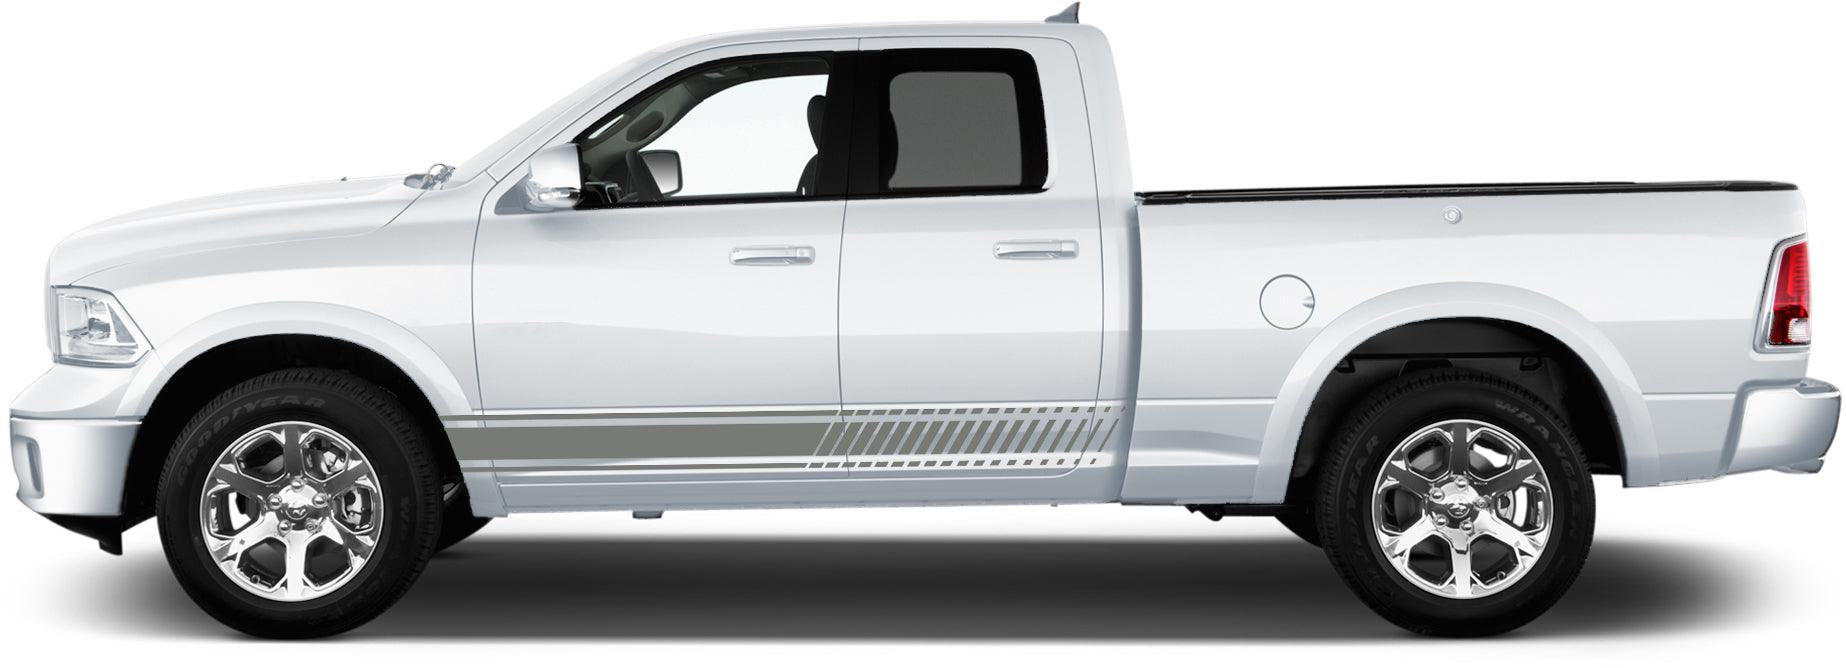 Dodge Ram 1500/2500/3500 (2009-2018) Custom Vinyl Decals, Graphics and Stickers - Side Stripes (Pair) - Jkprostickers